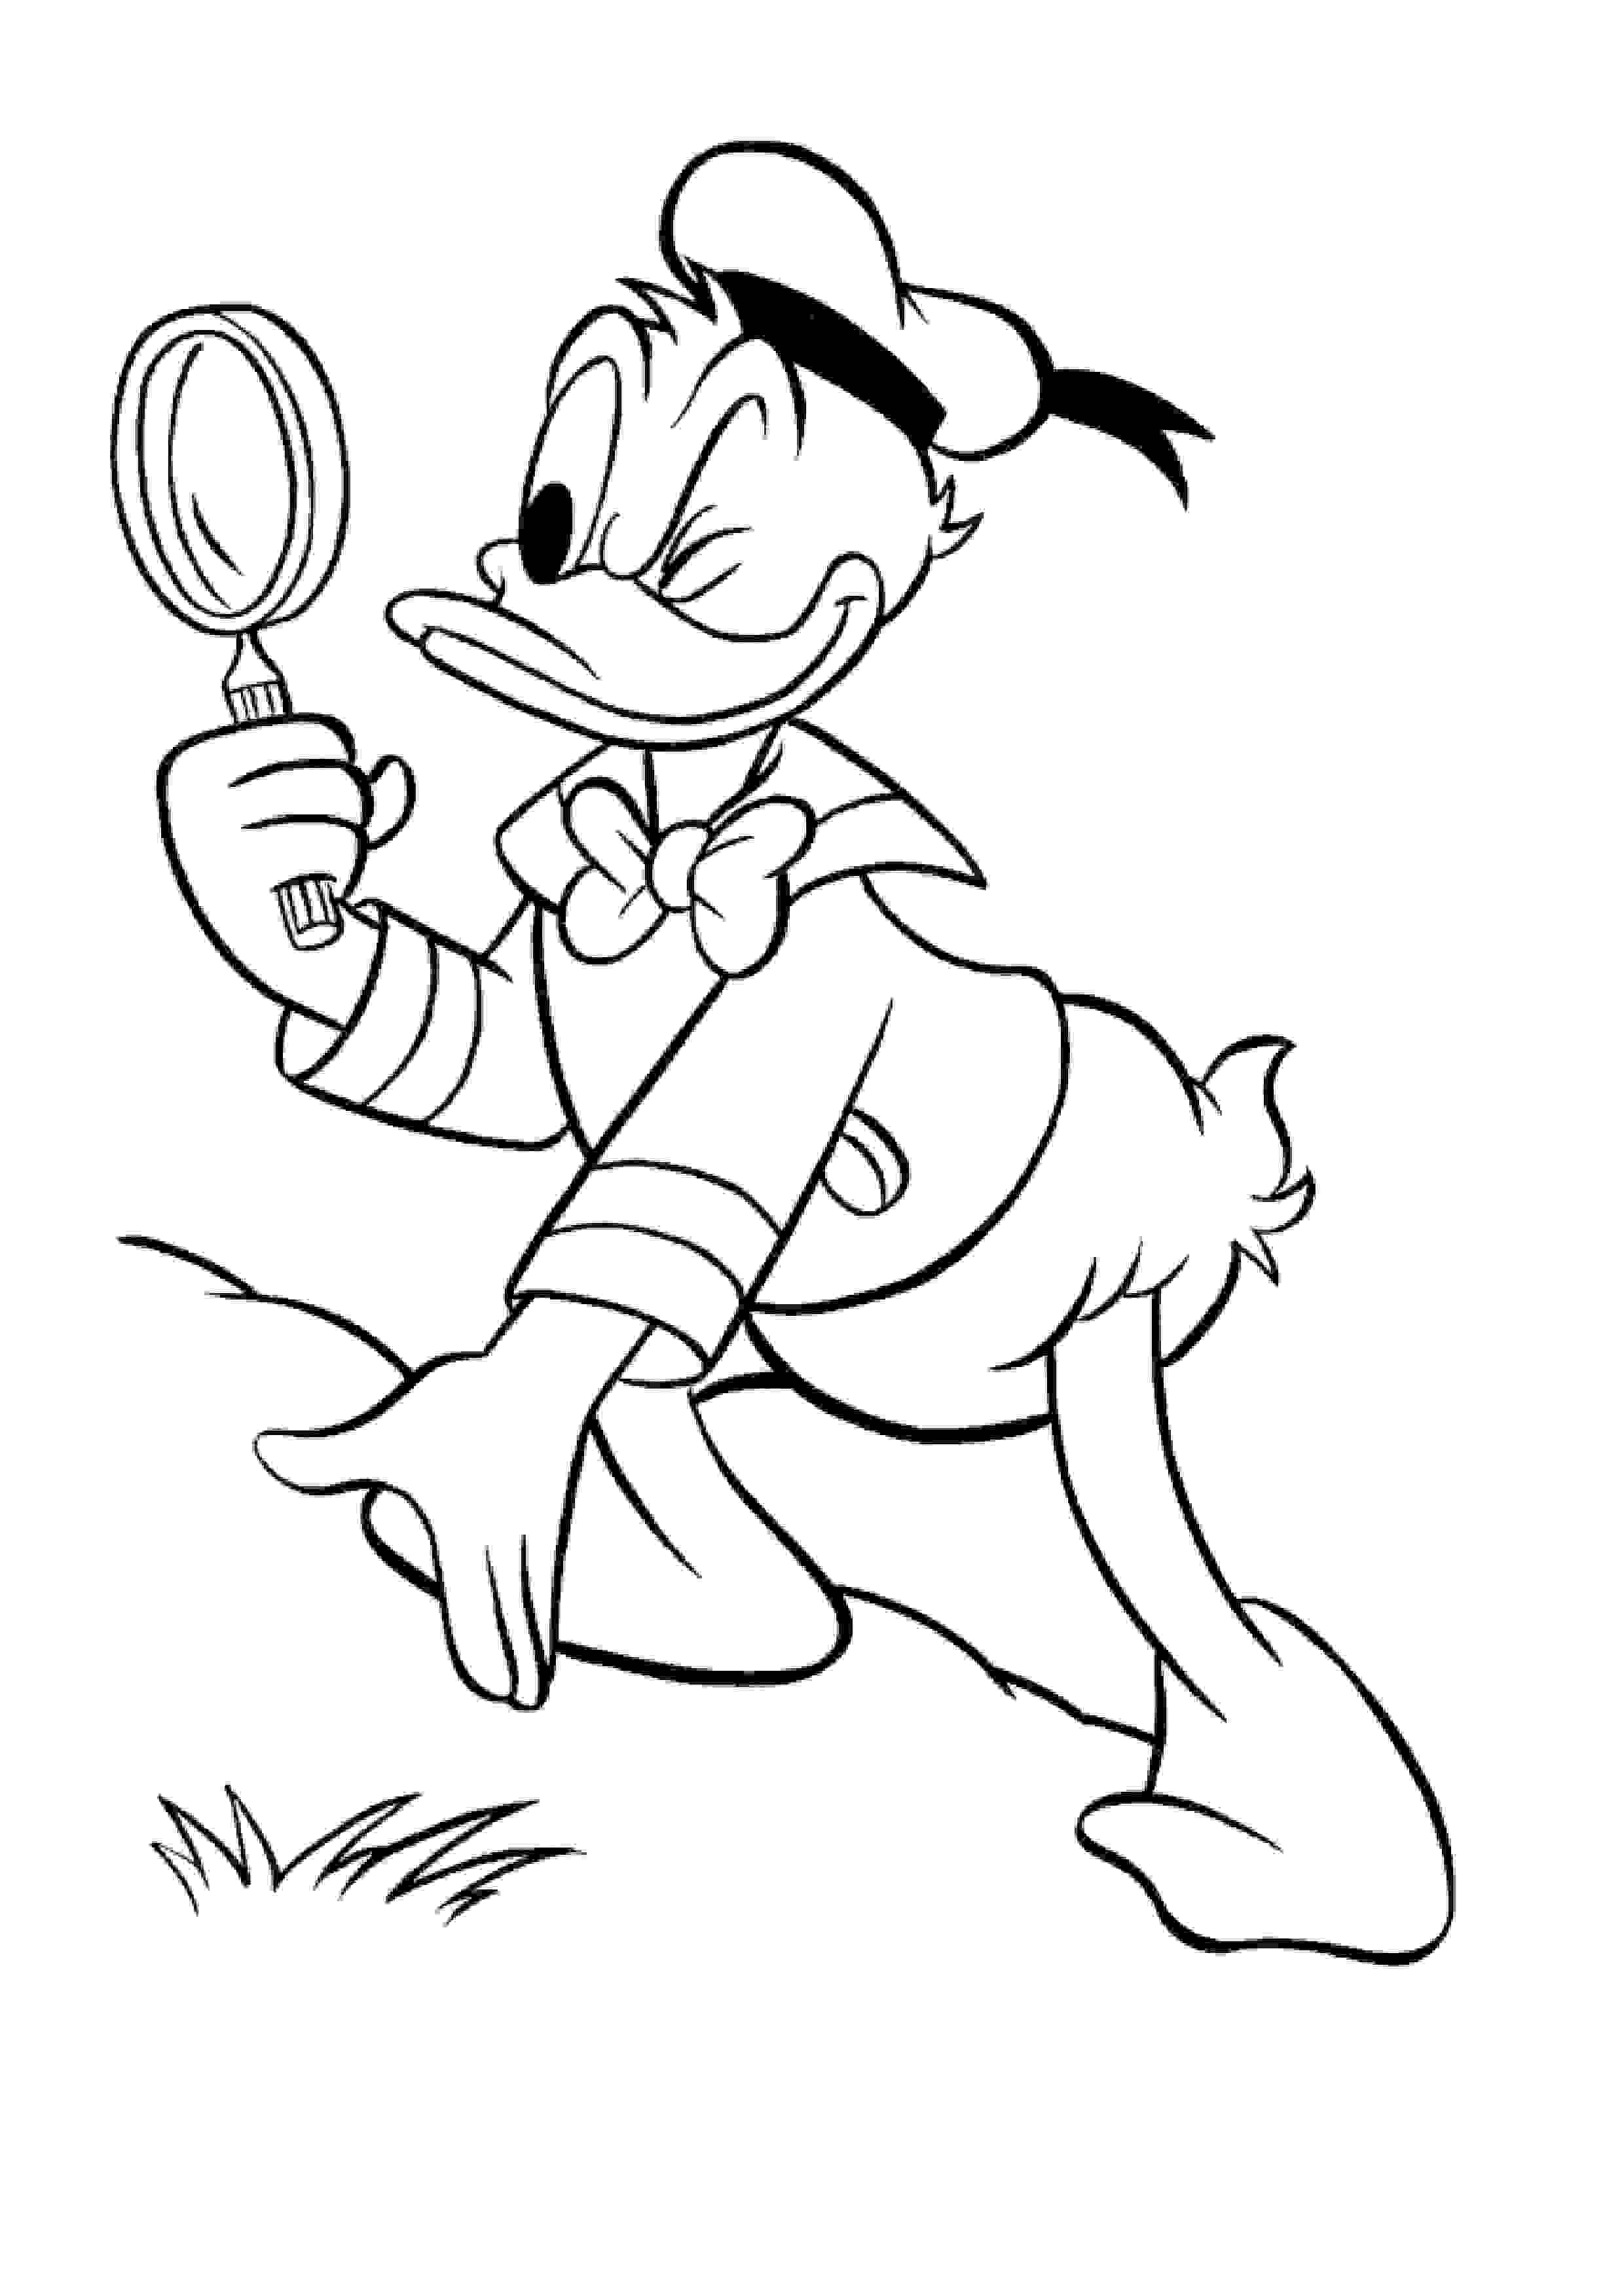 Detective Donald Duck Coloring Pages - Disney Coloring Pages ...